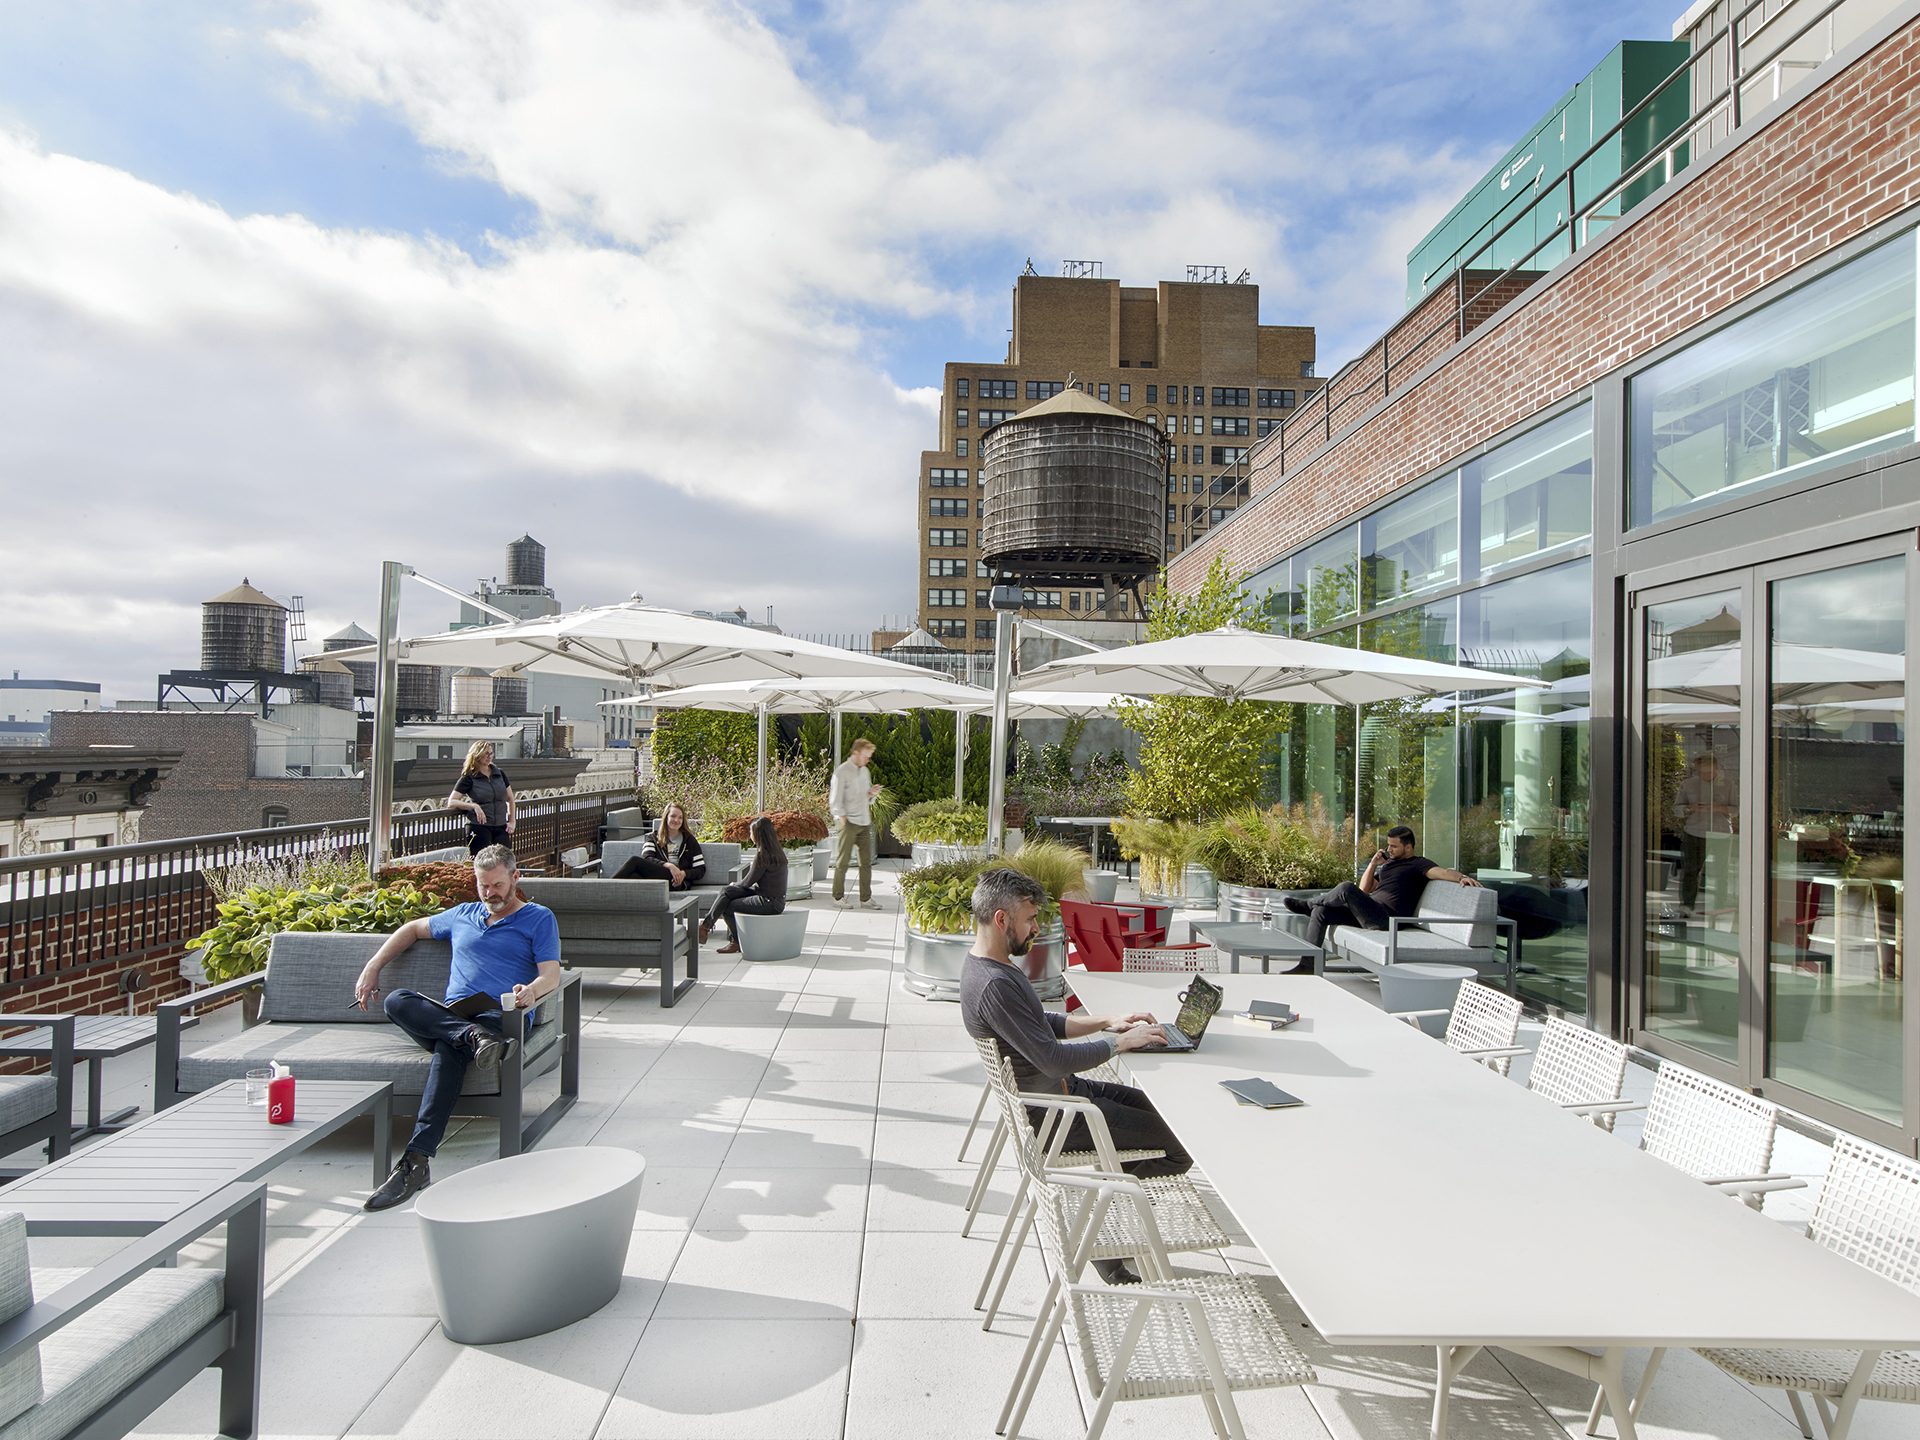 Rooftop and penthouse terrace at the new Peloton Headquarters